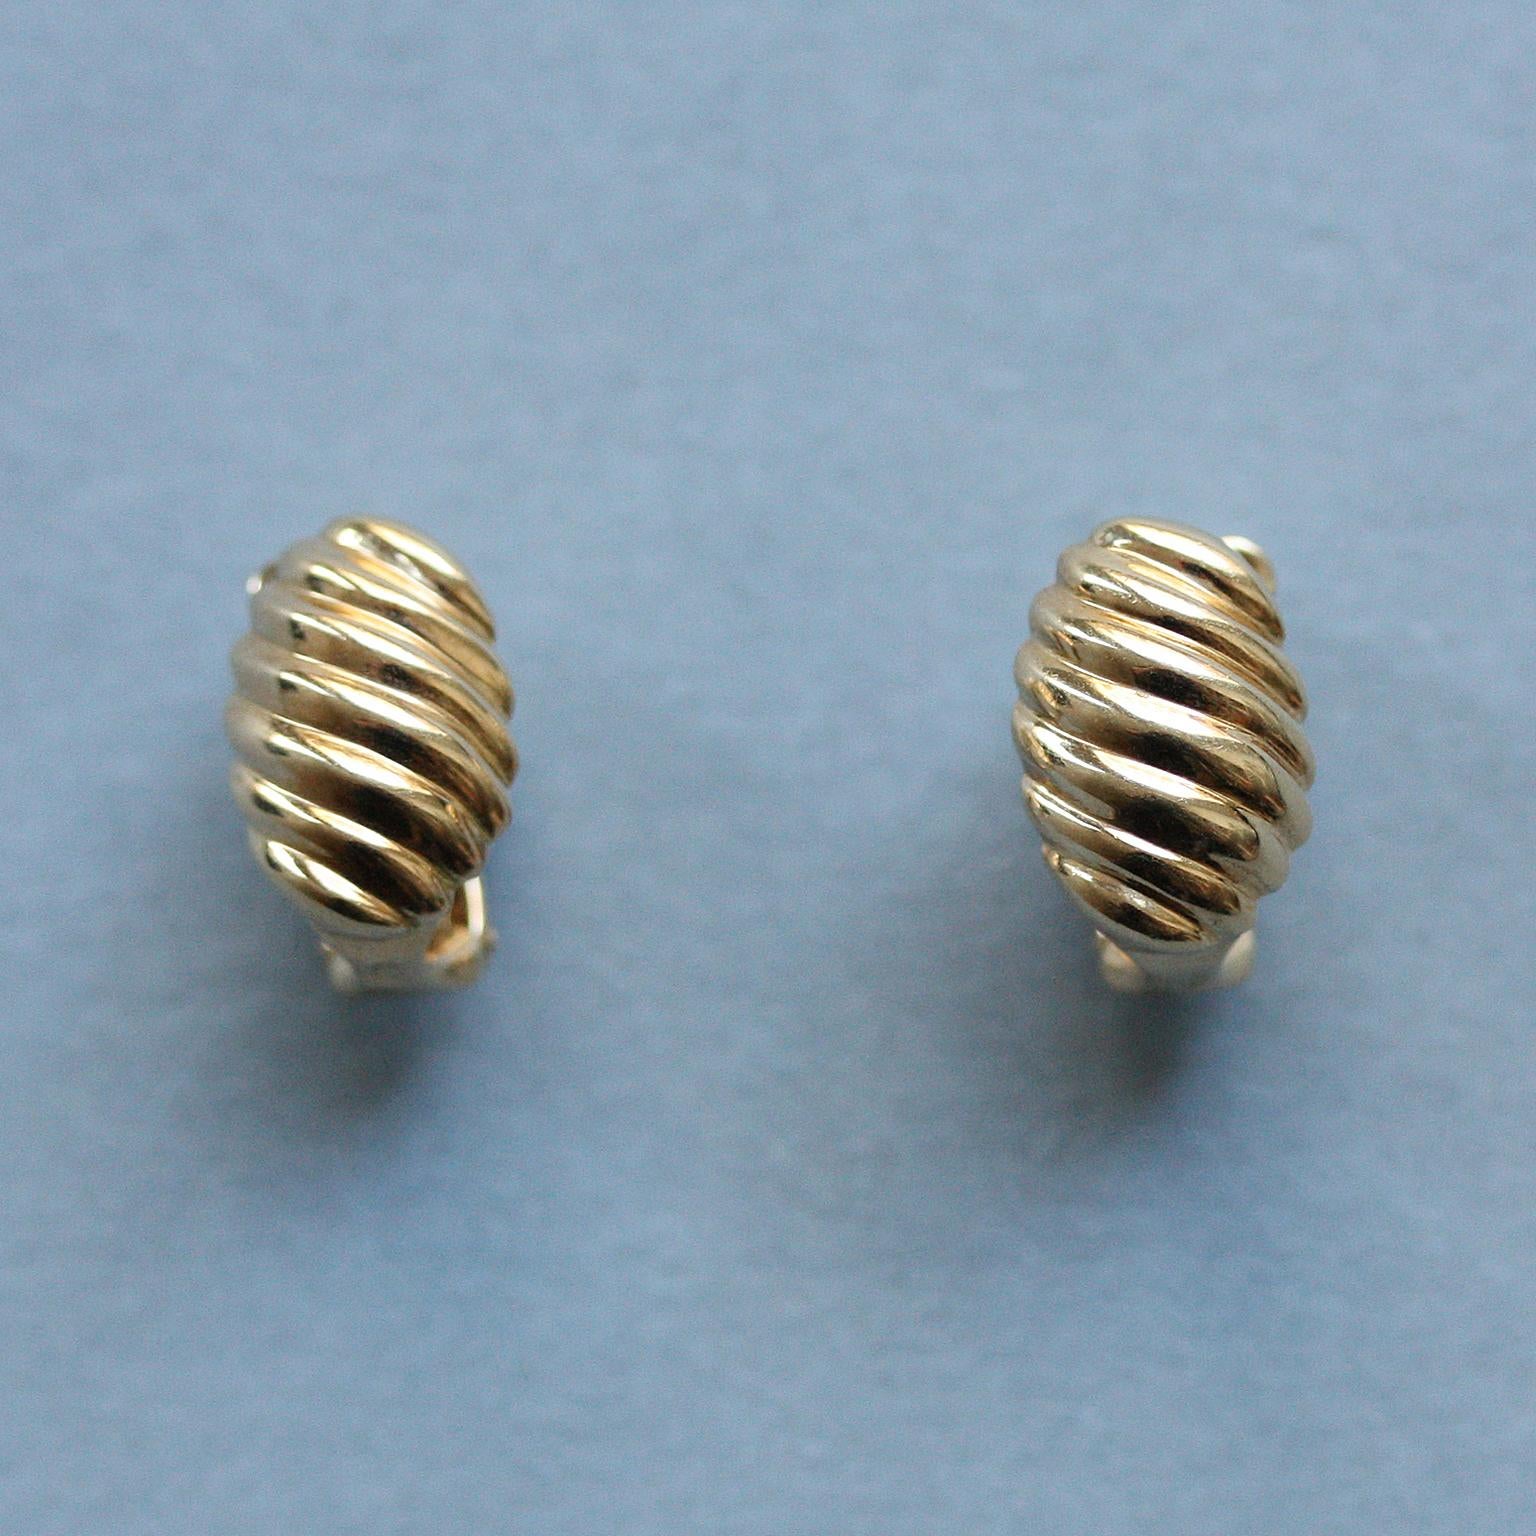 A pair of 18k yellow gold small oval ribbed ear clips, signed and numbered: VCA, BL 22158, for Van Cleef & Arpels, circa 1970.

Length: 1,3 cm
width: 0,8 cm
weight: 4,99 grams
